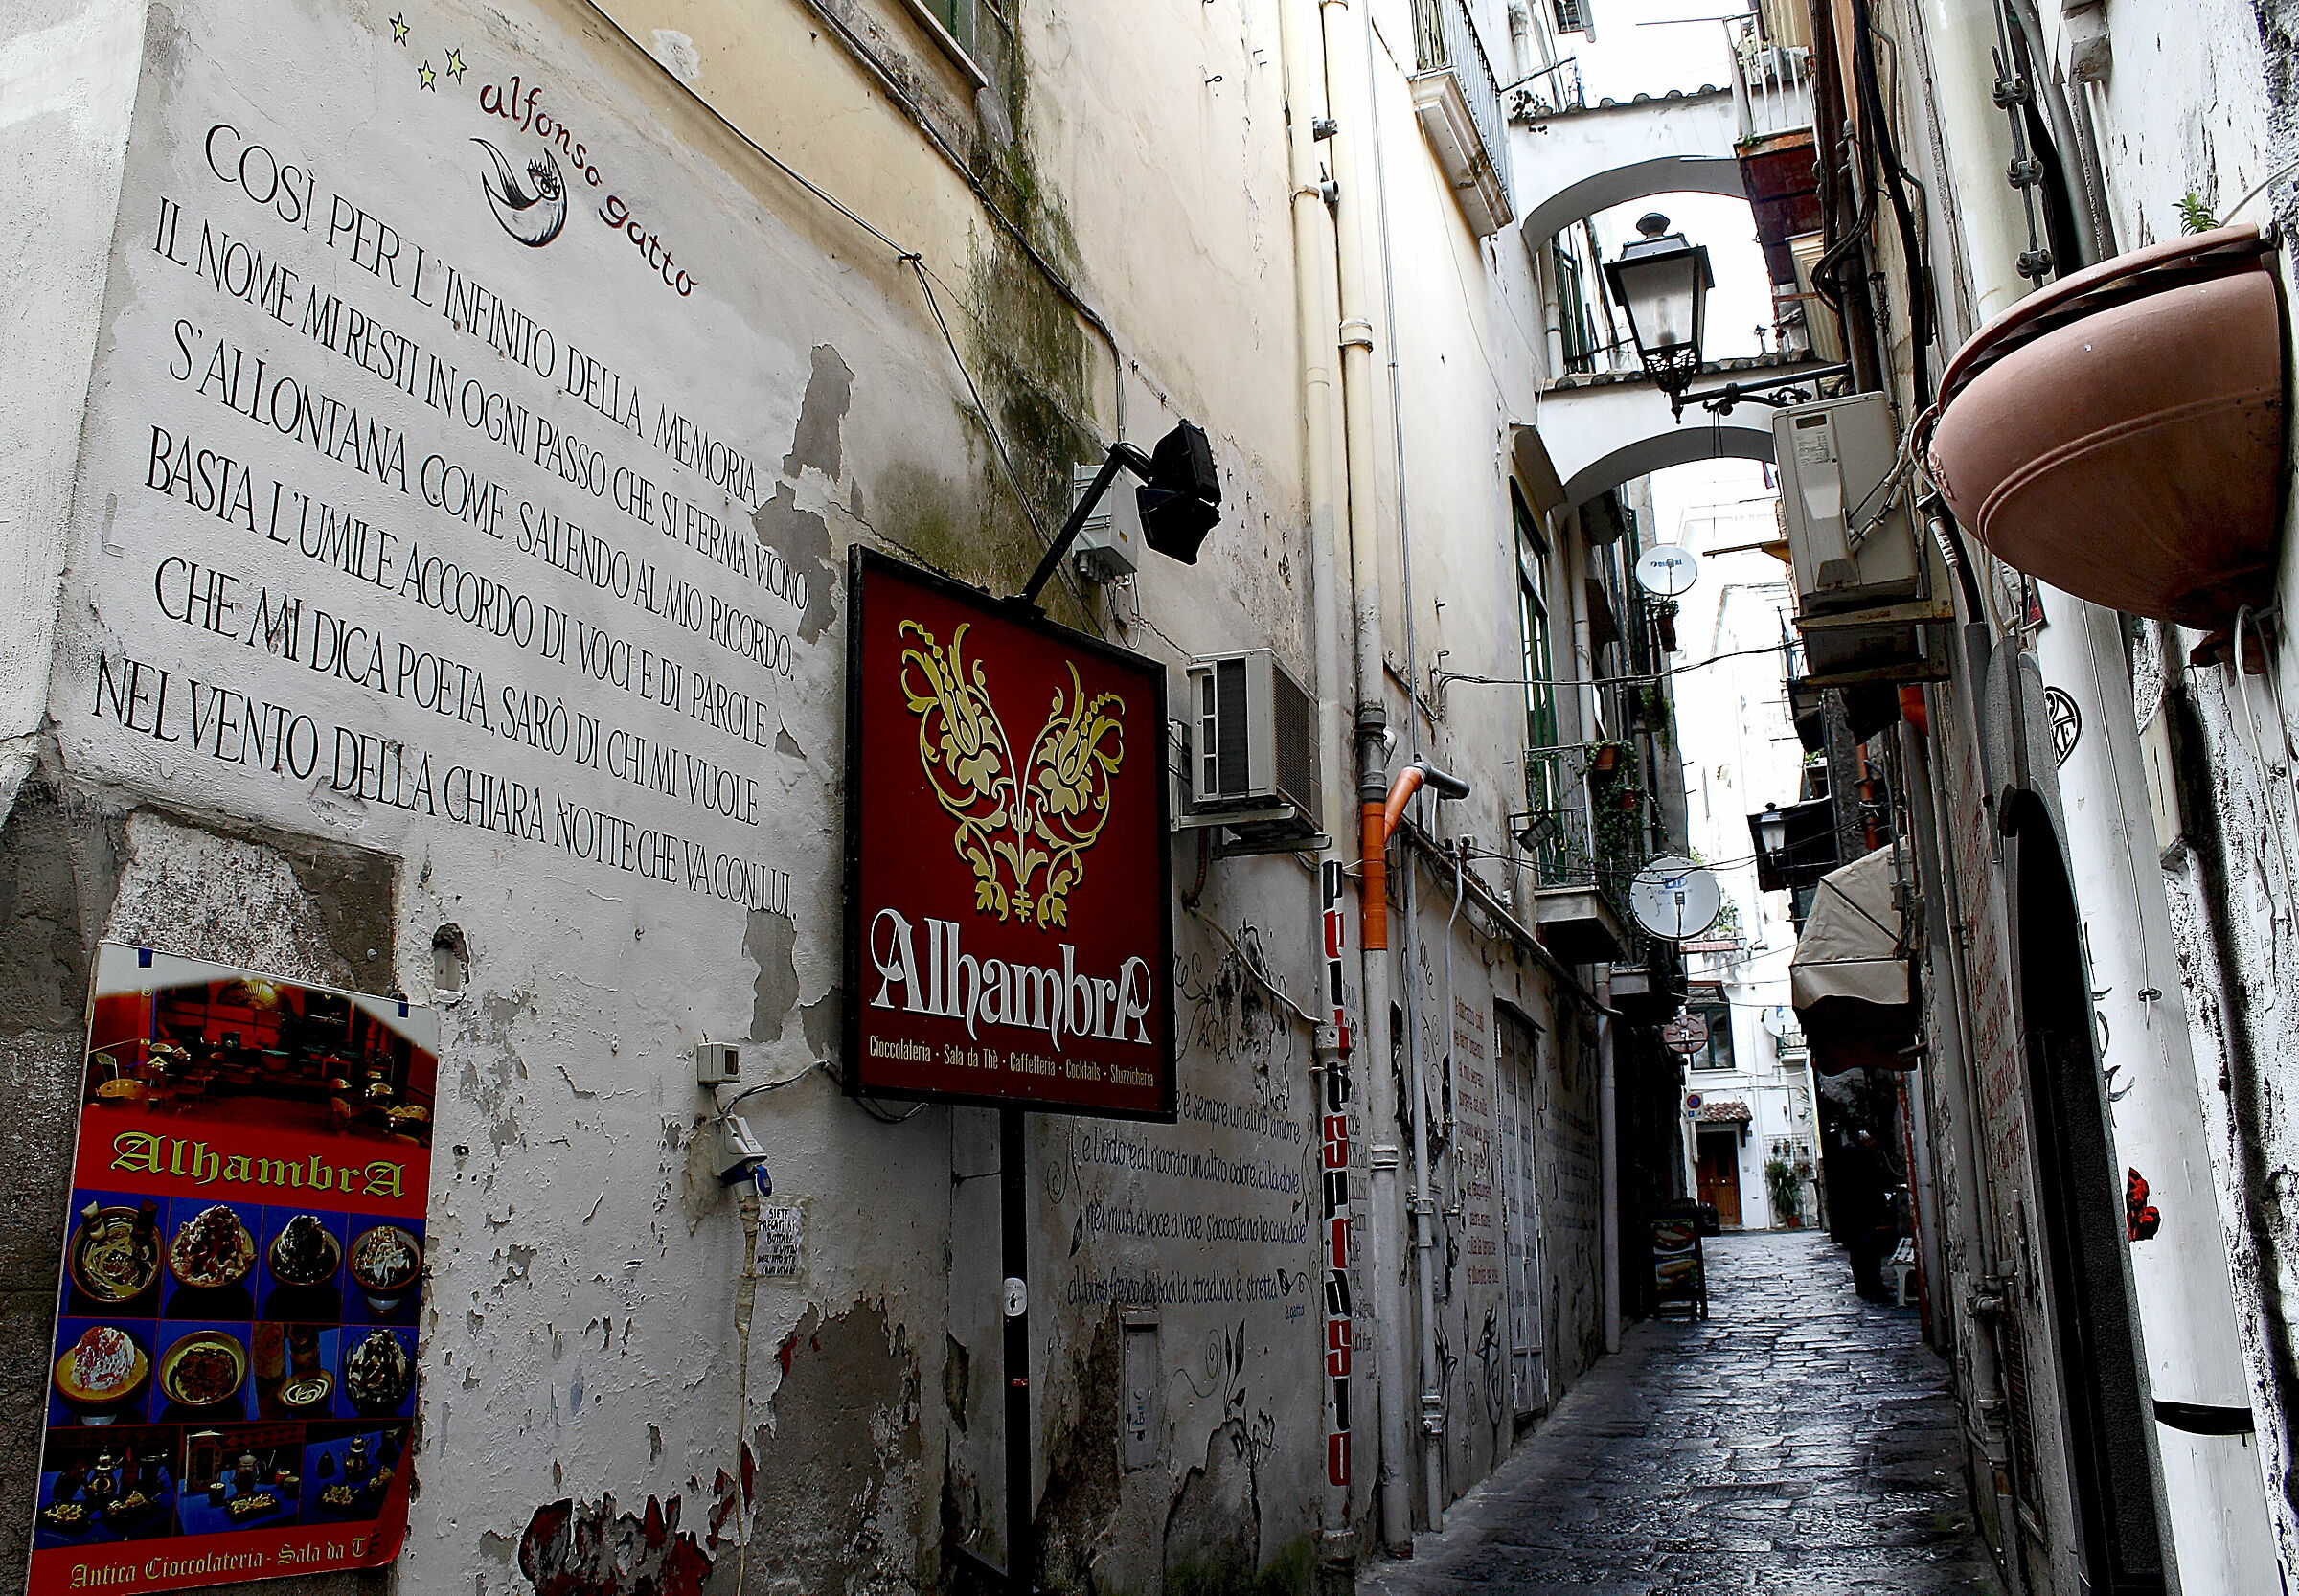 "Alfonso cat through the alleys..."...